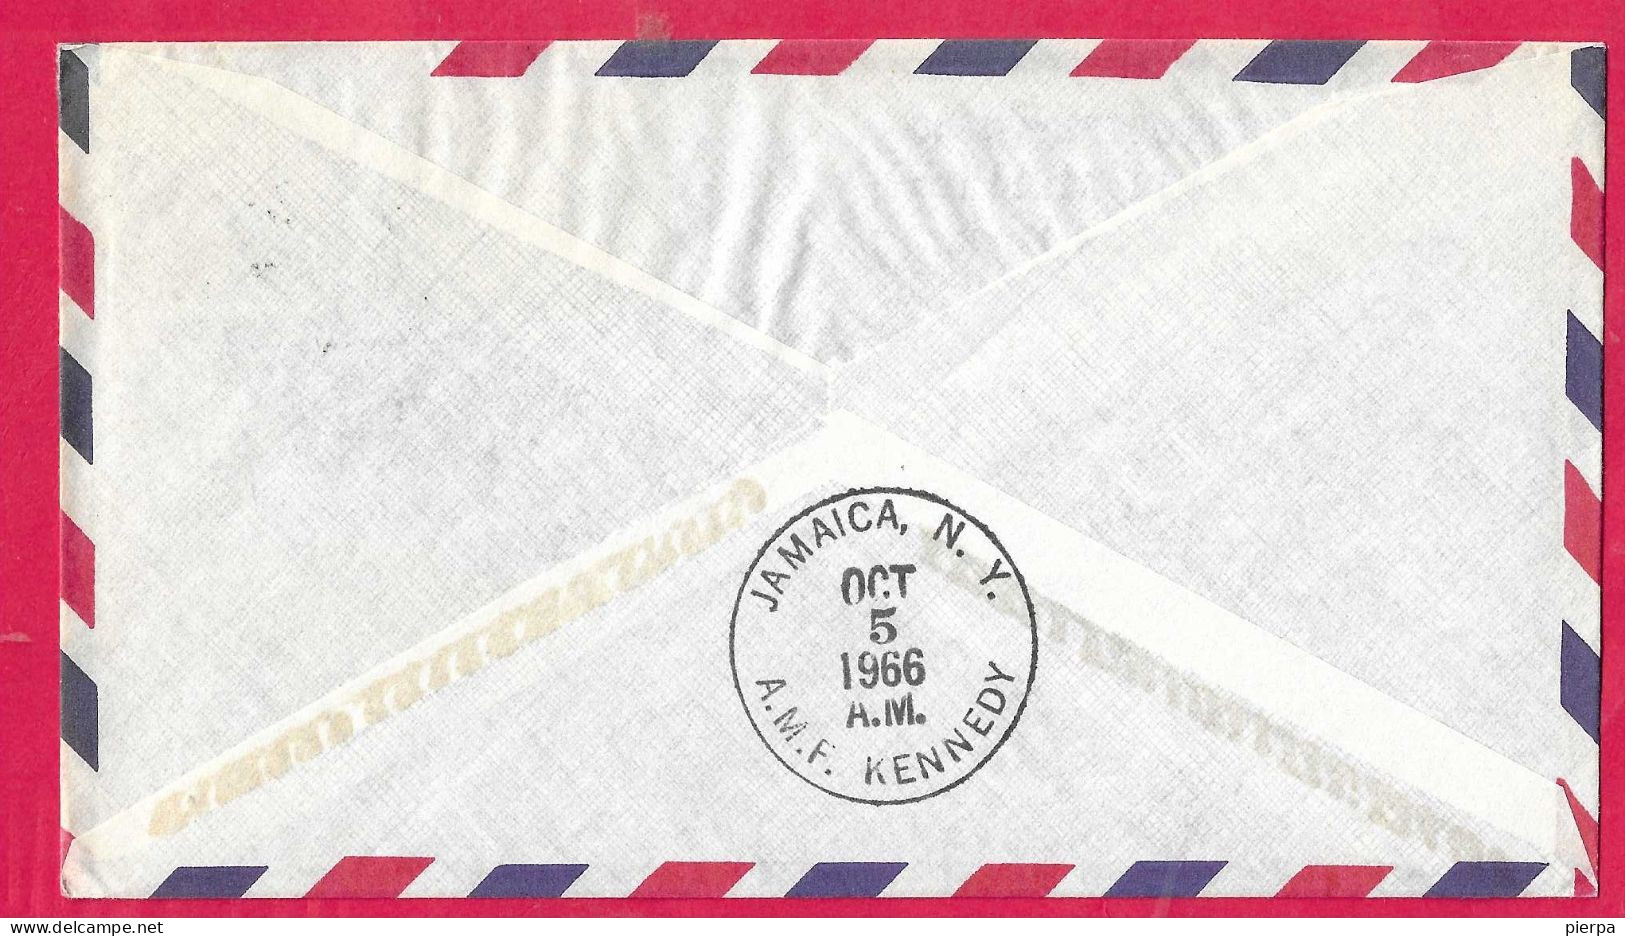 DANMARK - FIRST FLIGHT - SWA - FROM KOBENHAVN TO JAMAICA, N.Y. *5.10.66* ON OFFICIAL COVER - Luftpost